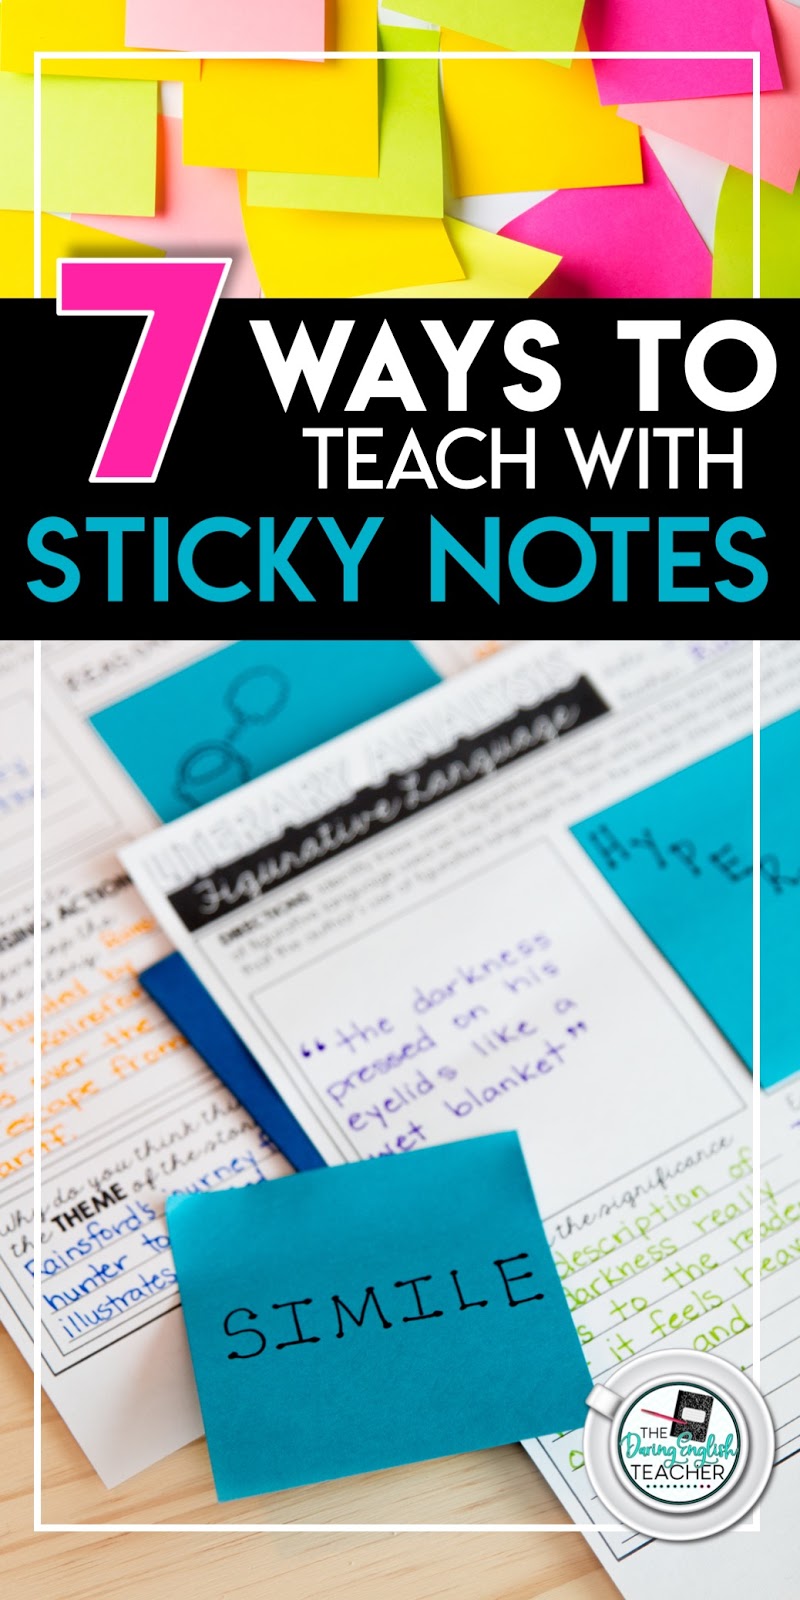 Post-It Notes - Comprehension Strategies